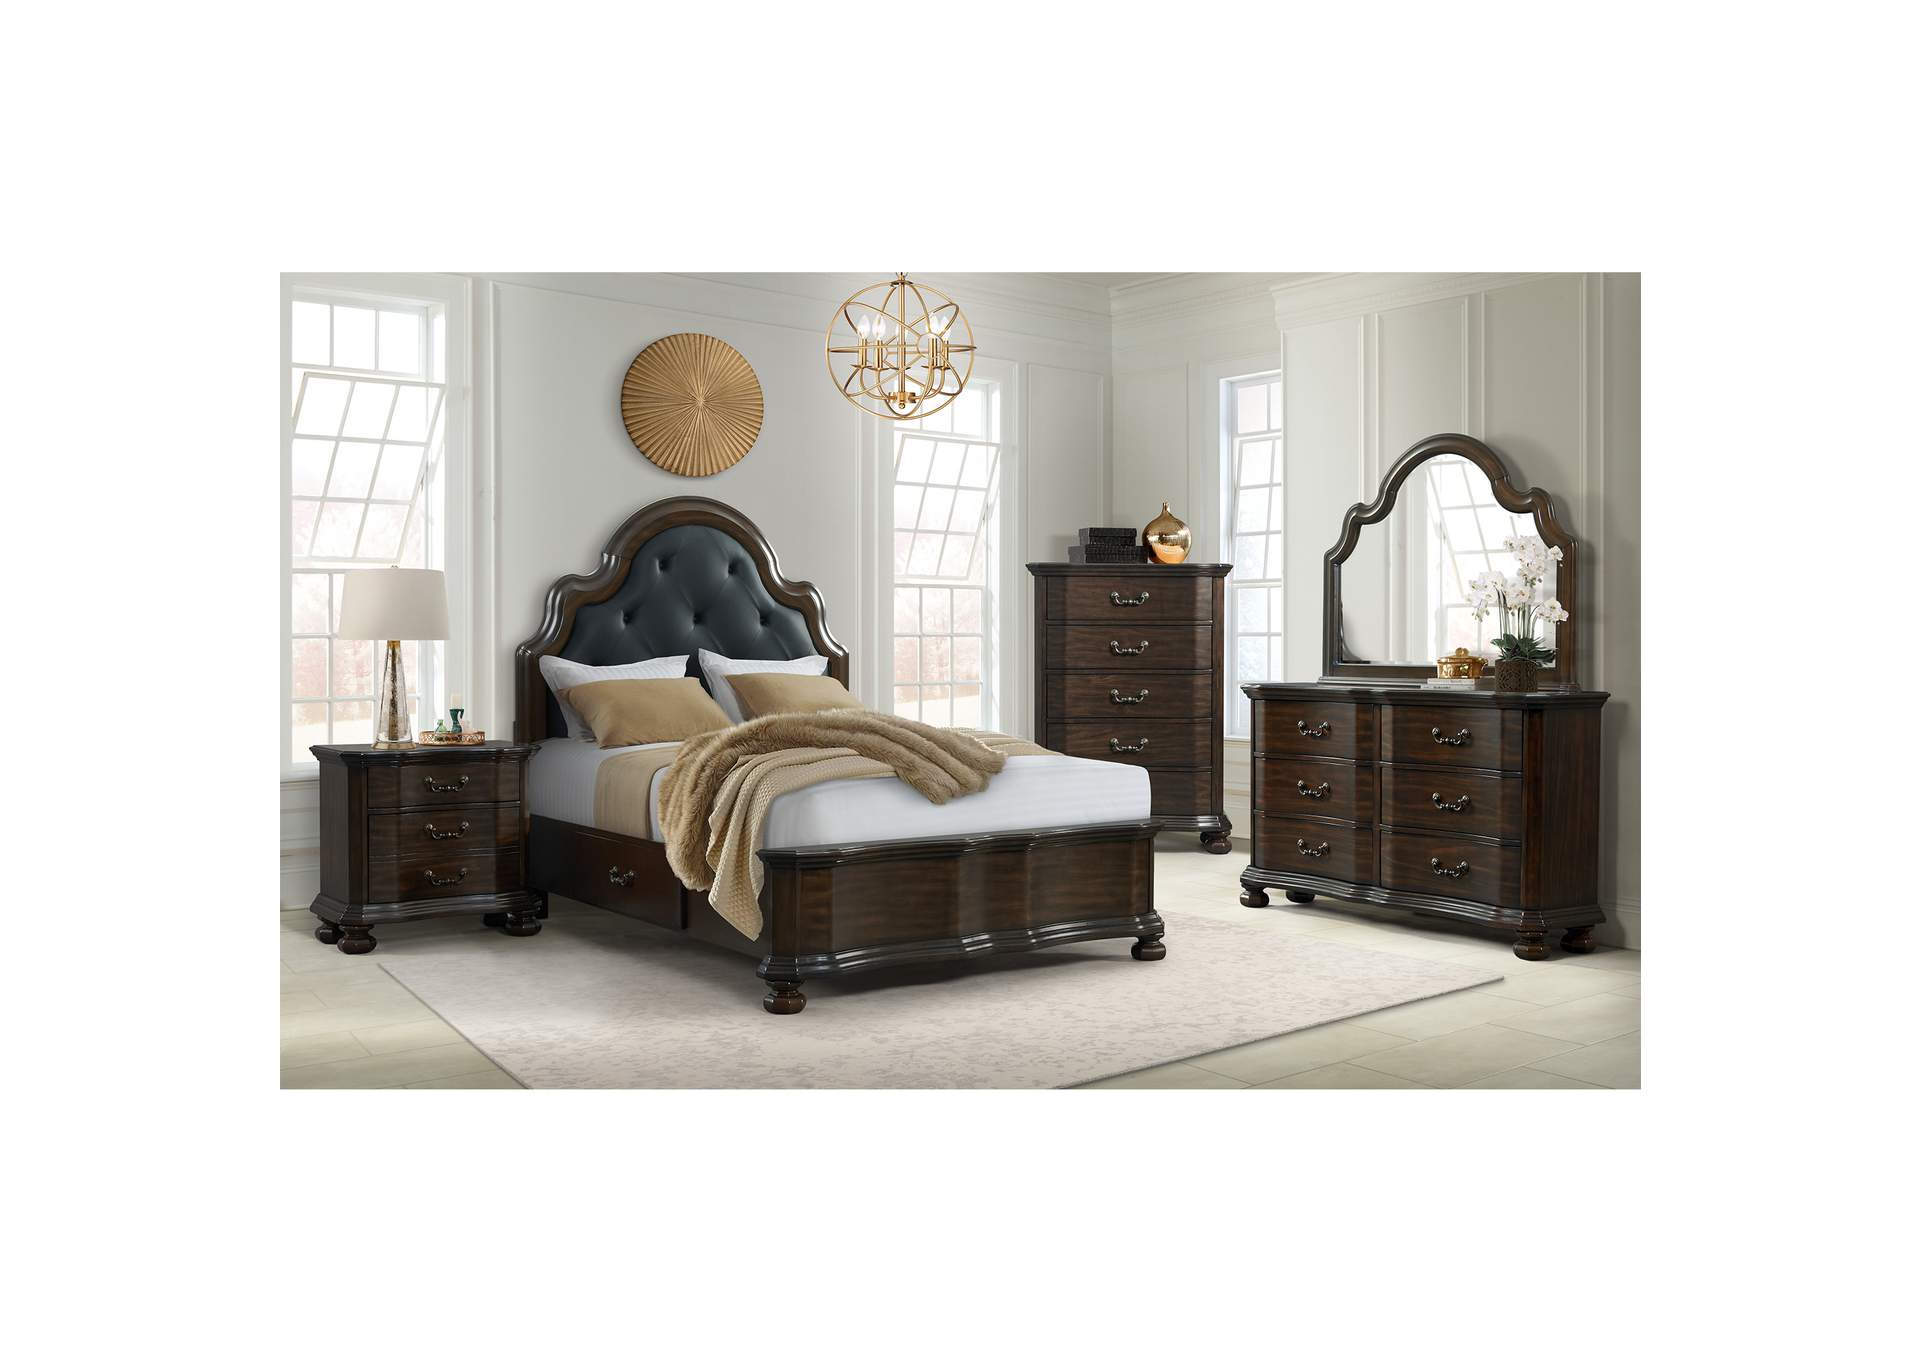 Avery King Bed,Elements